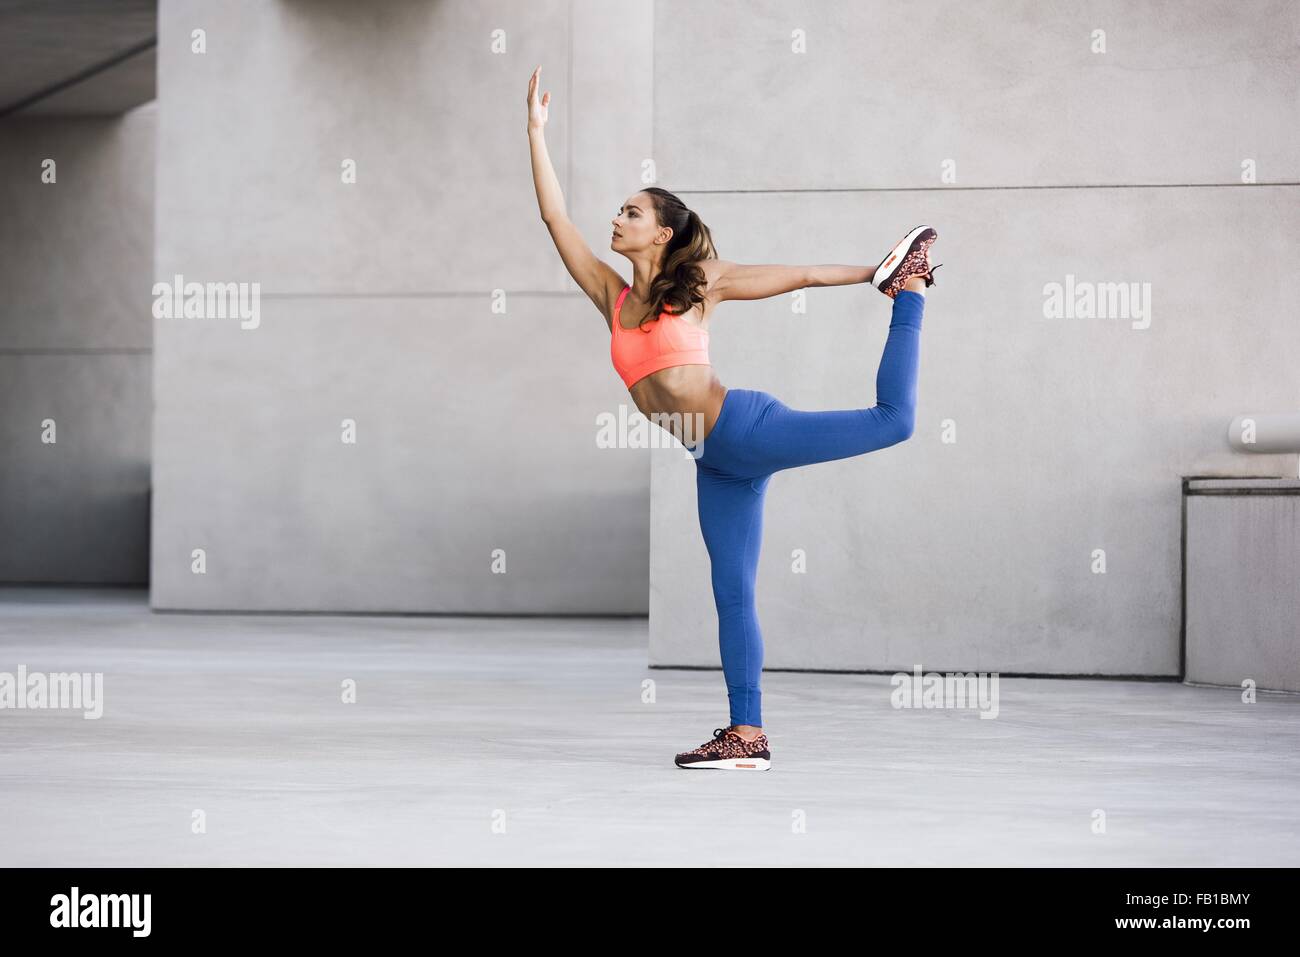 Side view of young woman balancing on one leg, leg raised holding ankle stretching Stock Photo